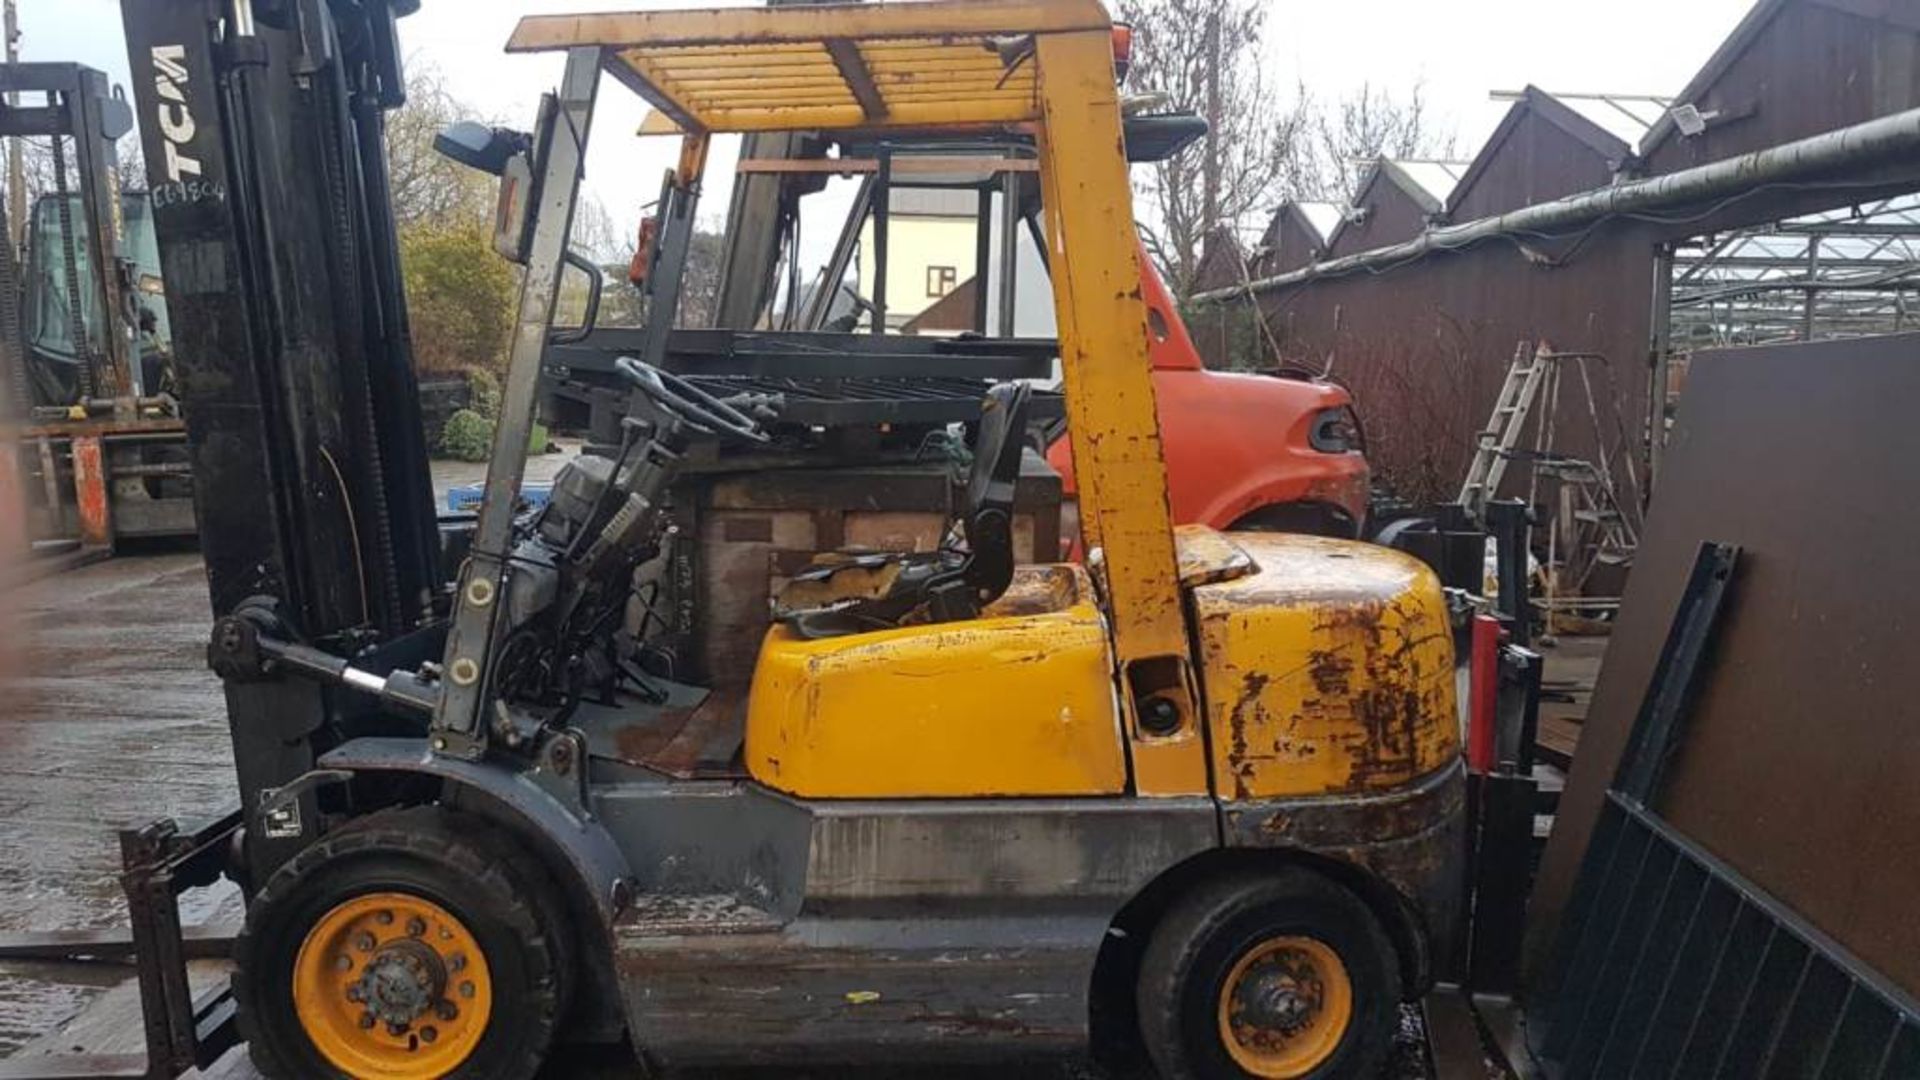 TCM FD 25 DIESEL FORKLIFT TRUCK WITH 3 STAGE MAST AND SIE SHIFT, 2.5 TONNE RATED VENDORS COMMENTS: